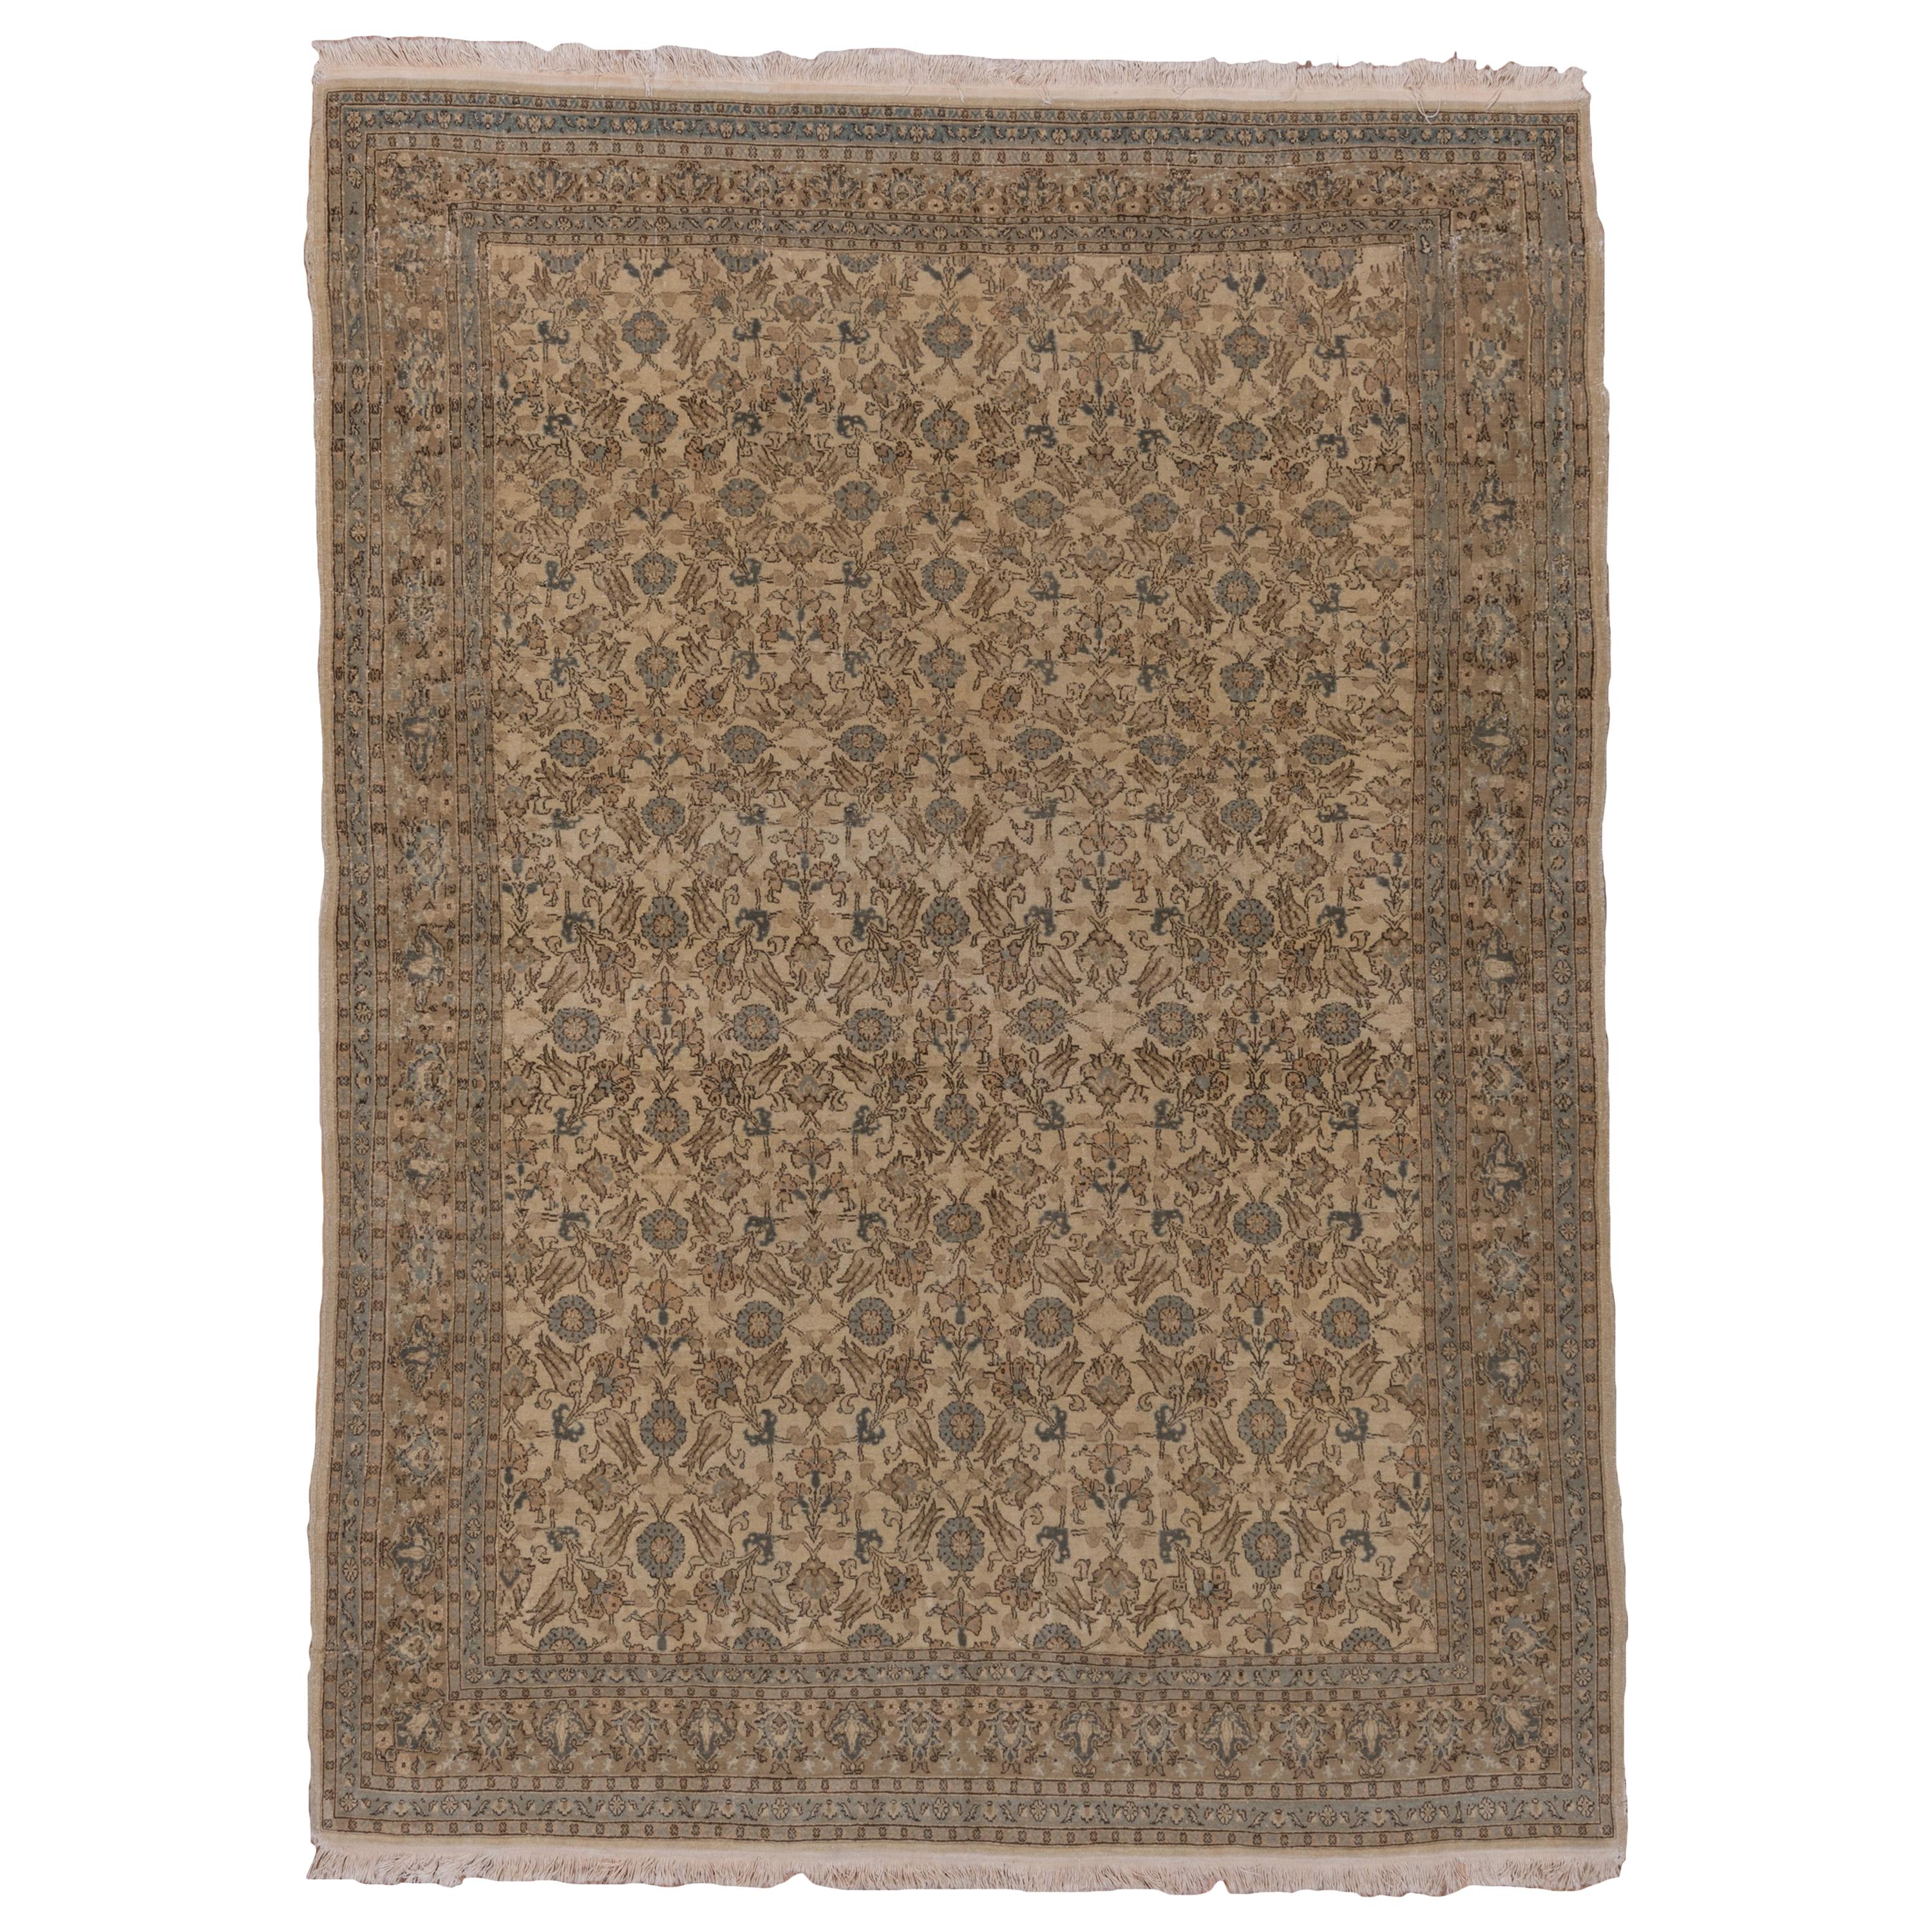 Early 20th Century Sivas Carpet For Sale